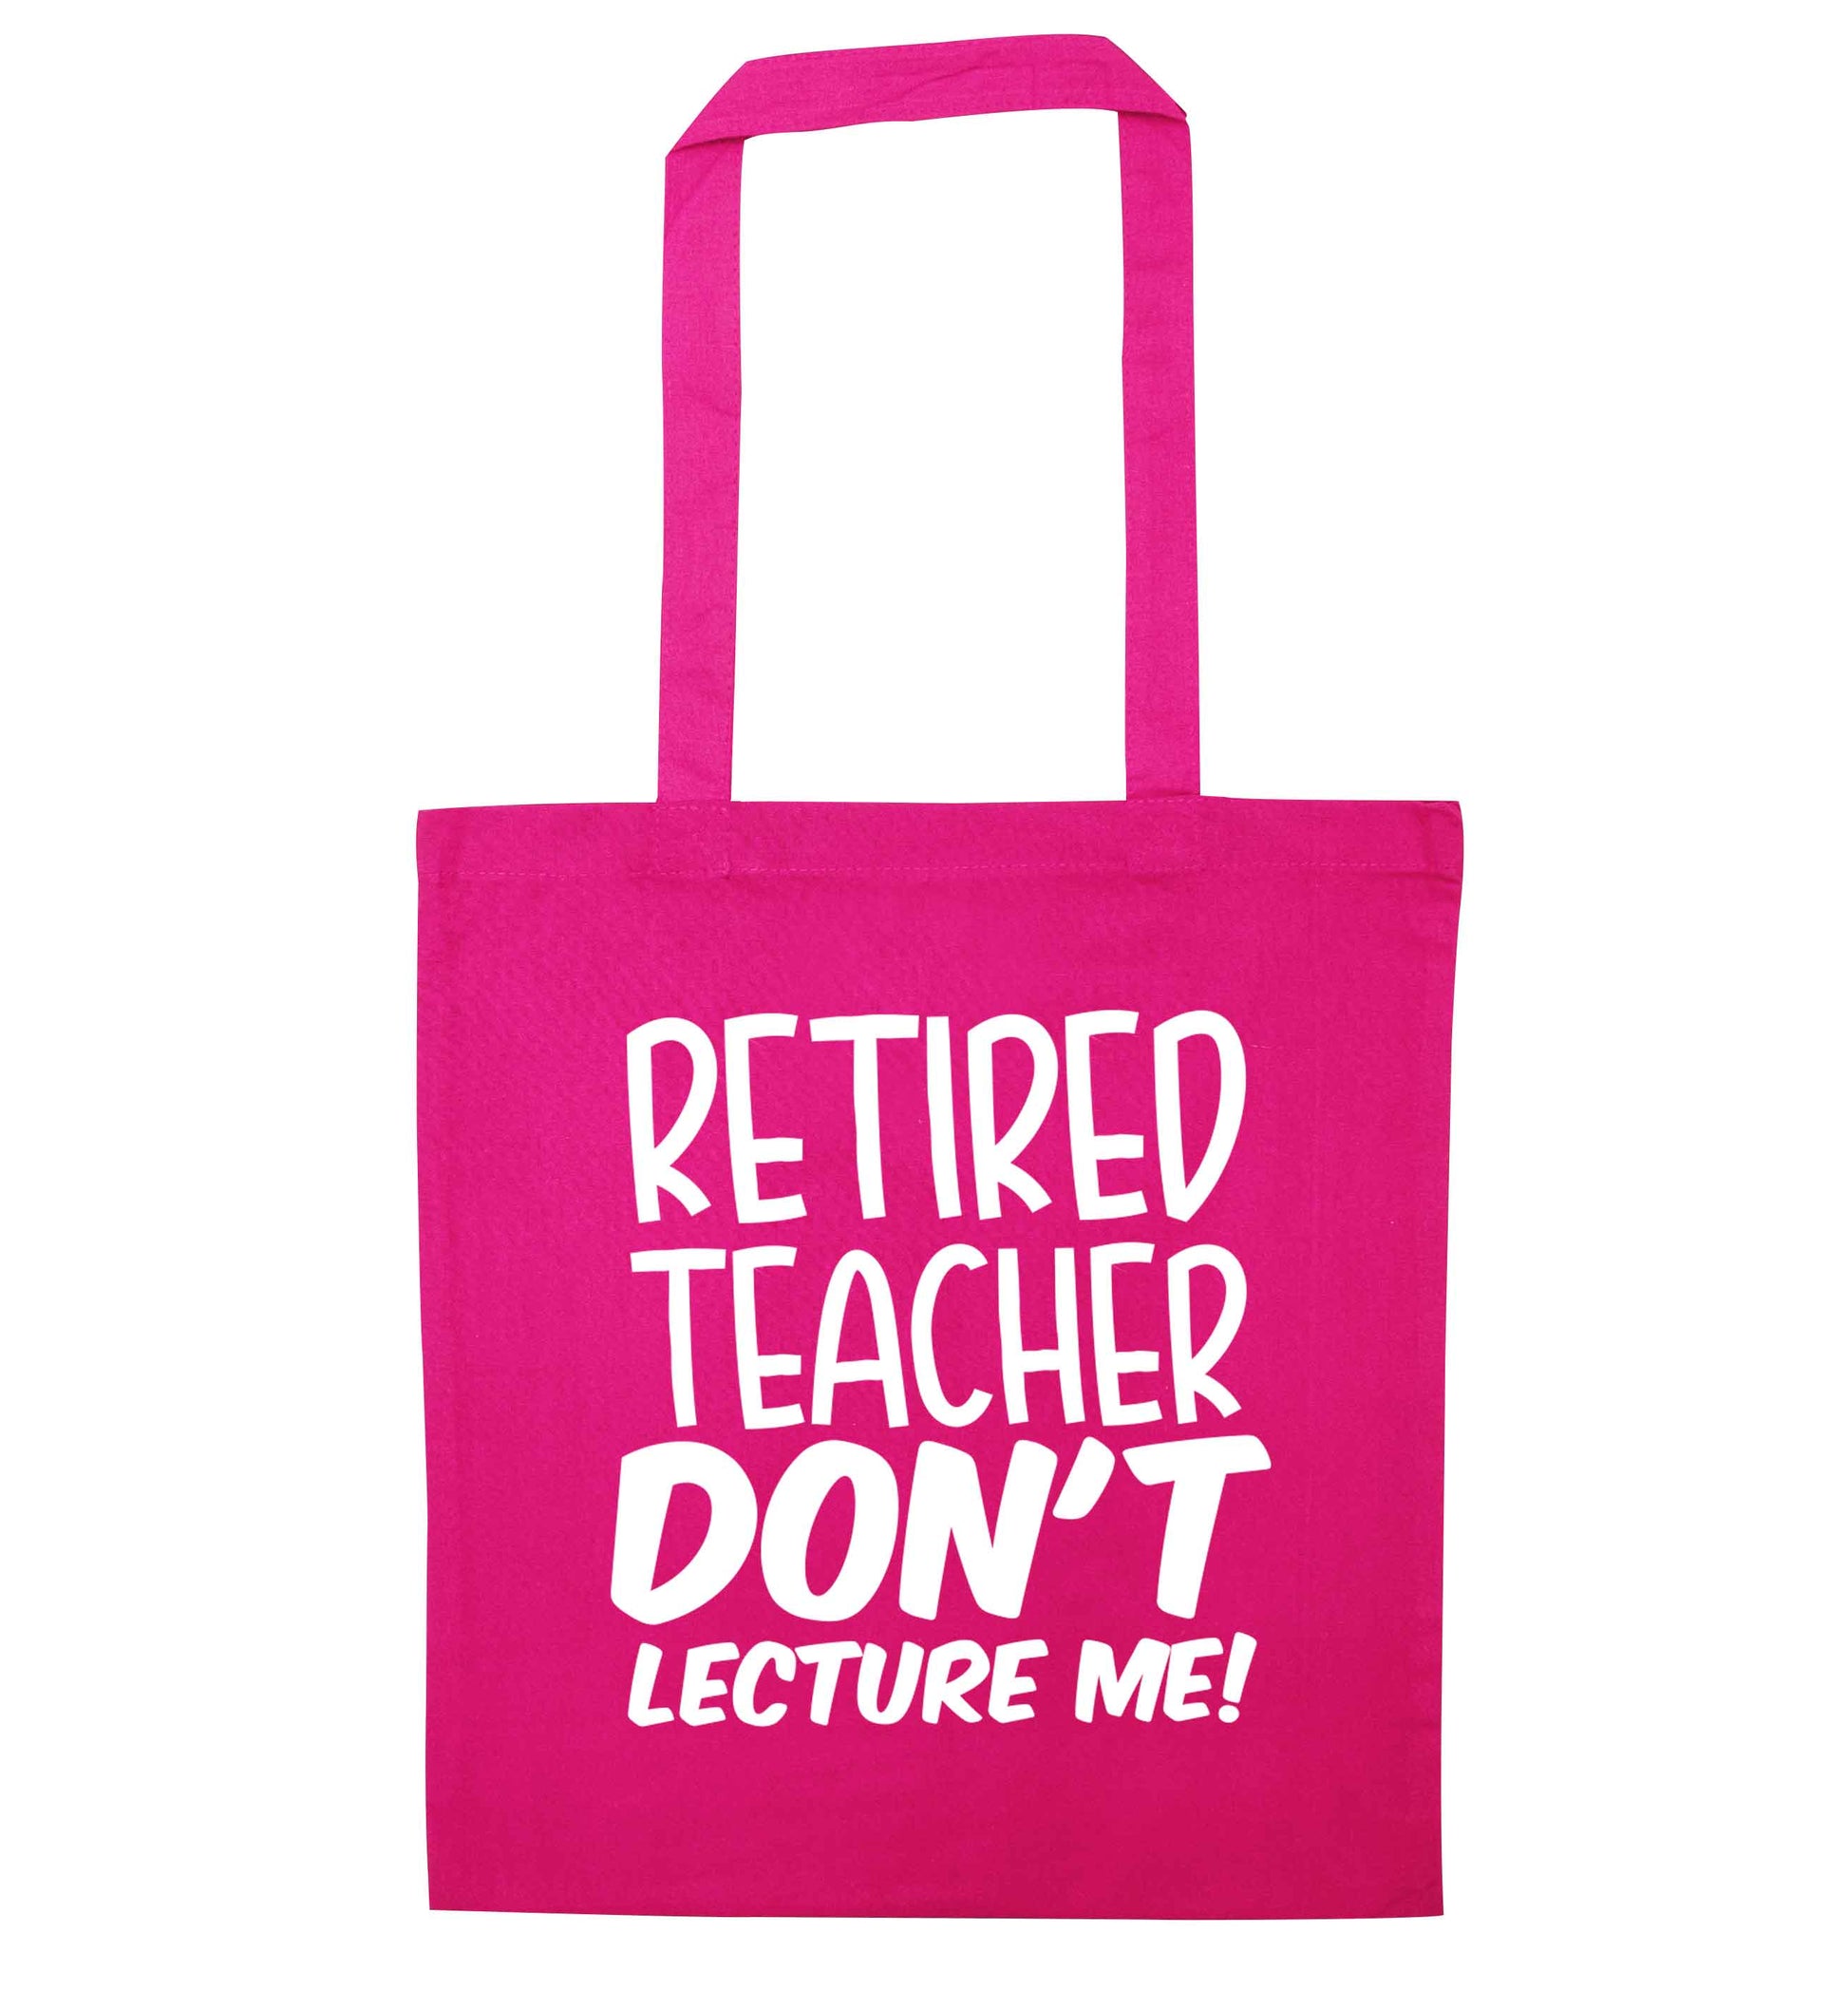 Retired teacher don't lecture me! pink tote bag